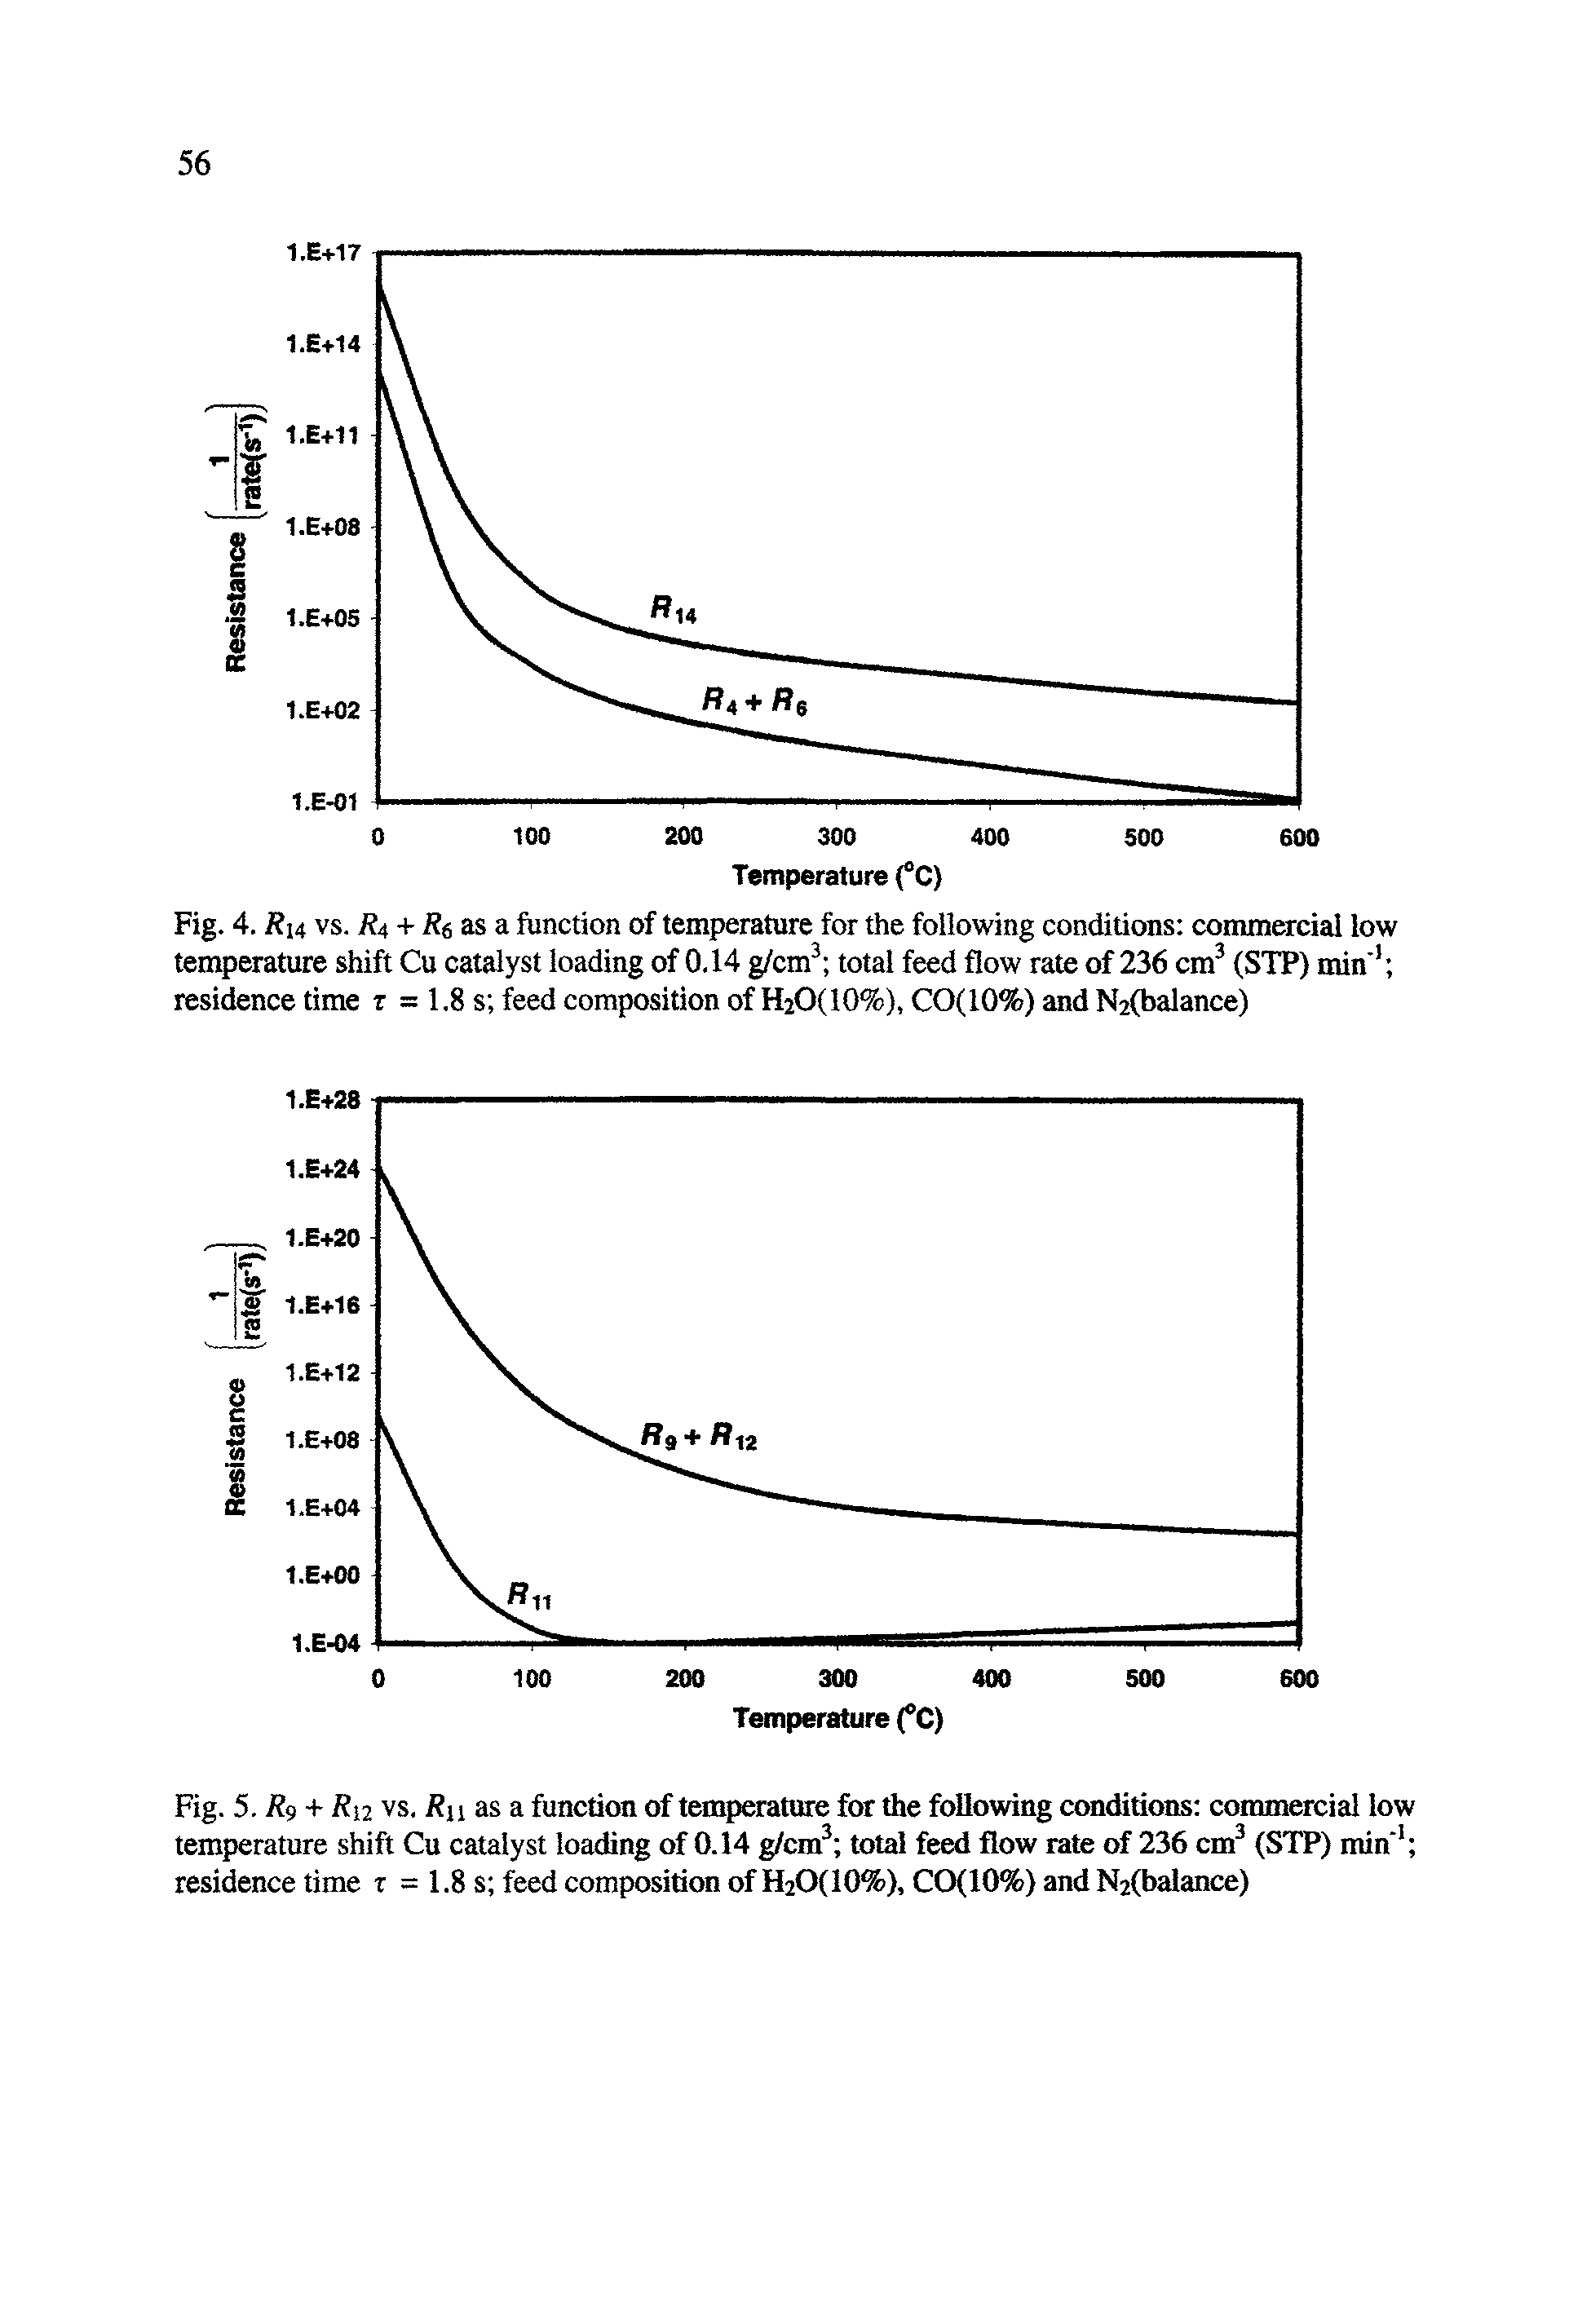 Fig. 4. Ri4 vs. / 4 + i 6 as a function of temperature for the following conditions commercial low temperature shift Cu catalyst loading of 0.14 g/cm total feed flow rate of 236 cm (STP) min residence time r = 1.8 s feed composition of H2O(10%), CO(10%) and Nilbalance)...